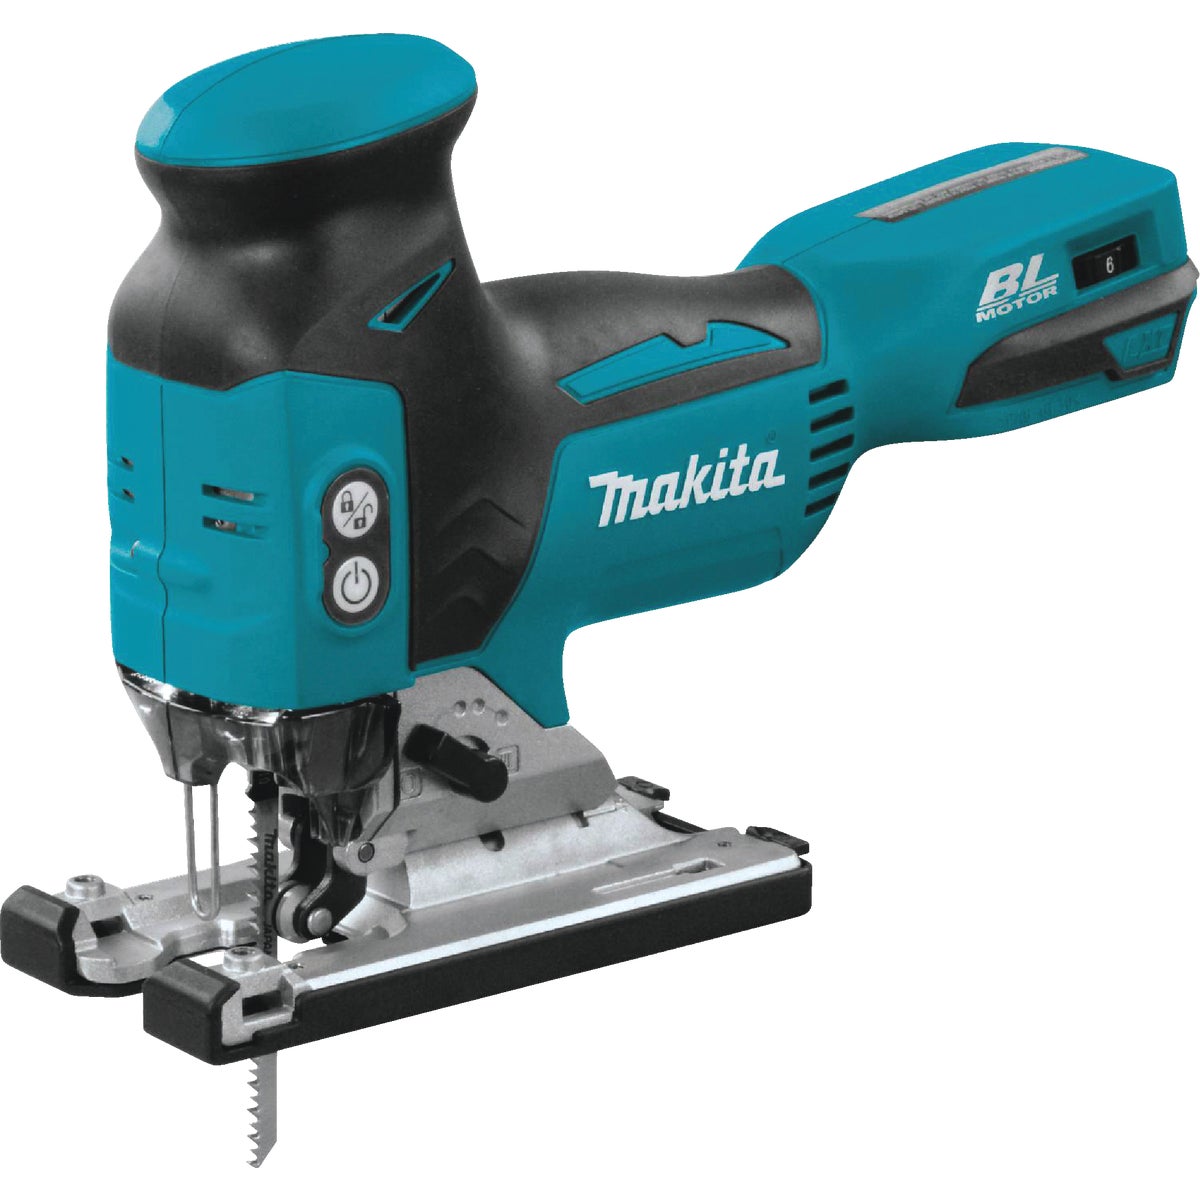 Makita 18 Volt LXT Lithium-Ion Brushless Barrel Grip Cordless Jig Saw (Tool Only)